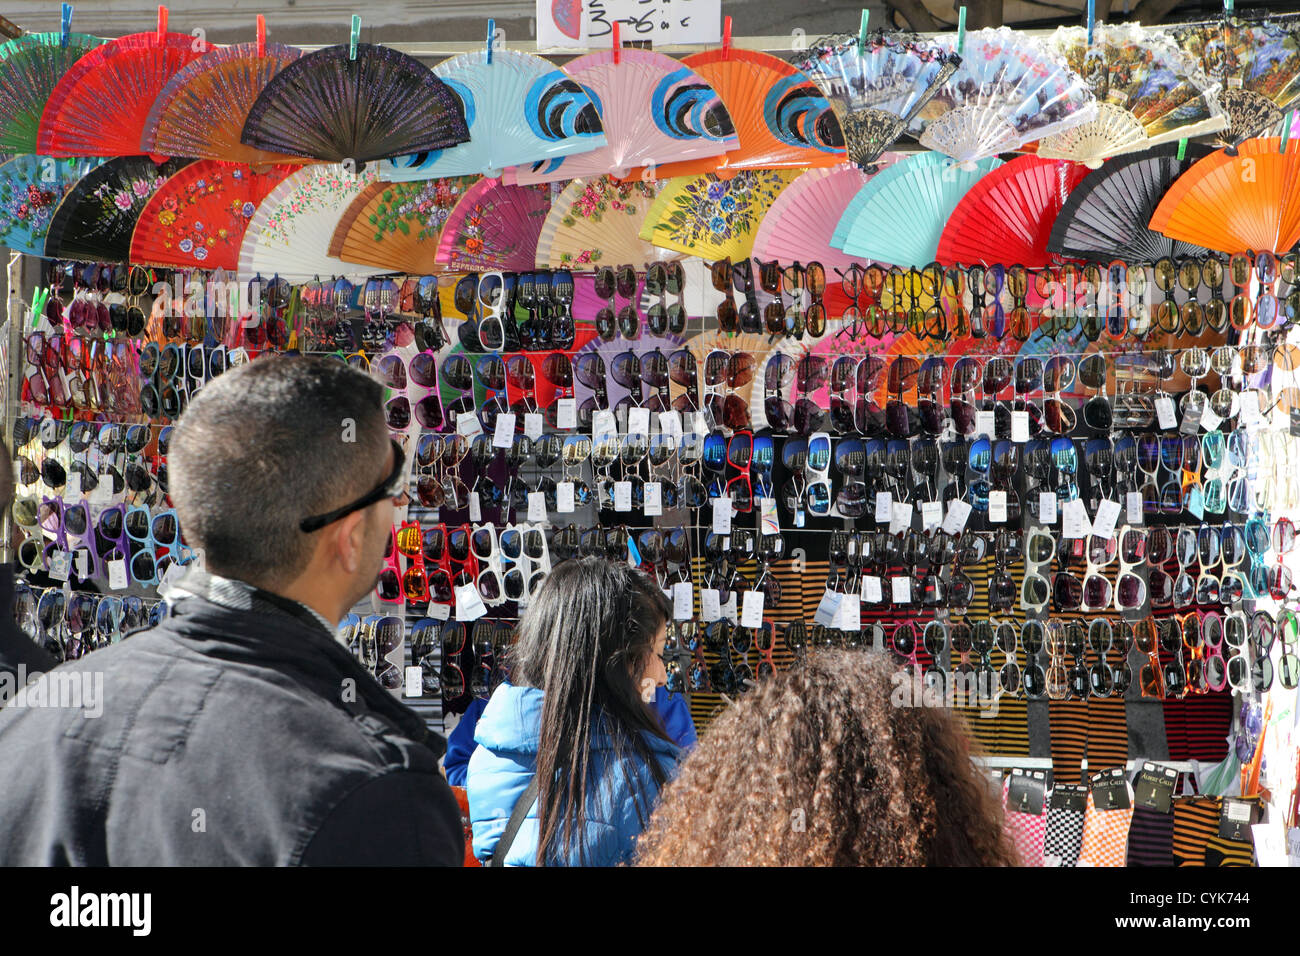 Consumers tourists browsing bargain hunting sunglasses Spanish fans, street market stall, Madrid, Spain Stock Photo